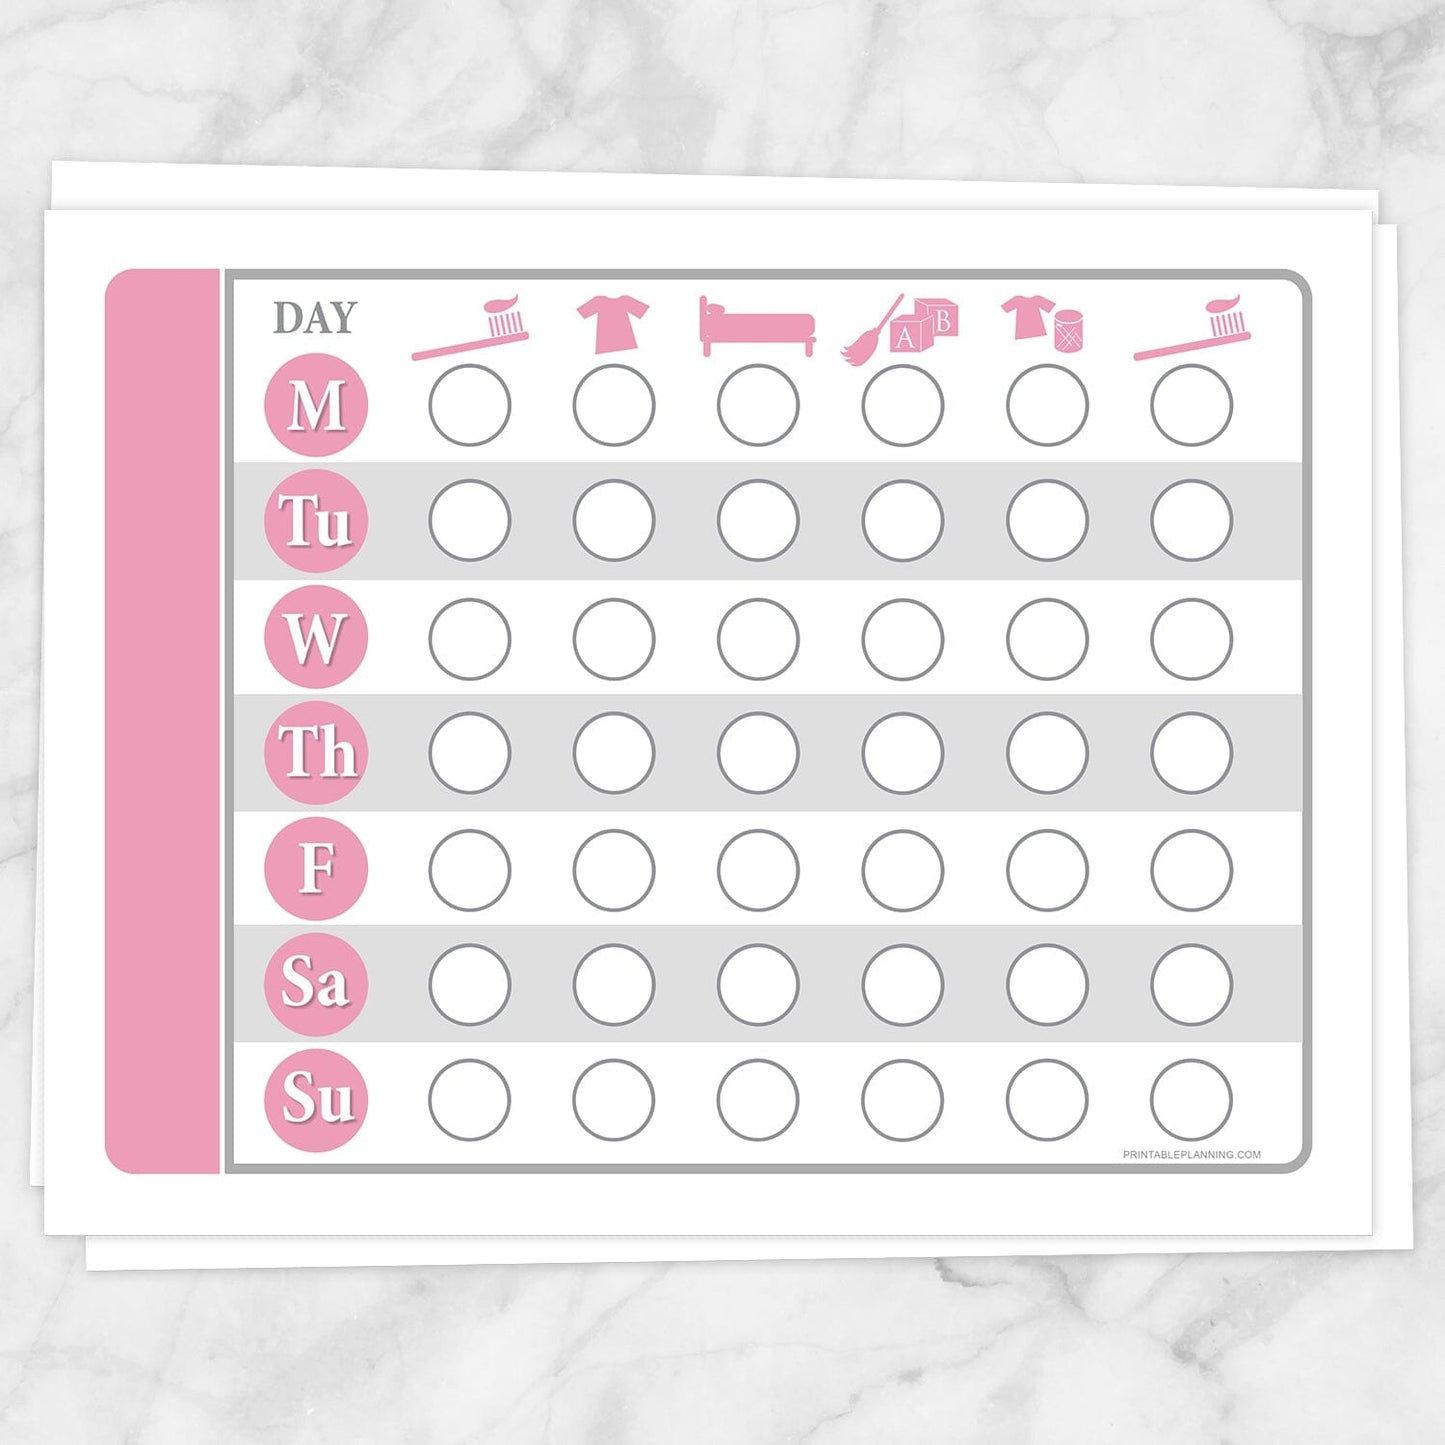 Printable Toddler Chore Chart - Pink Daily Routine Weekly Pages at Printable Planning.